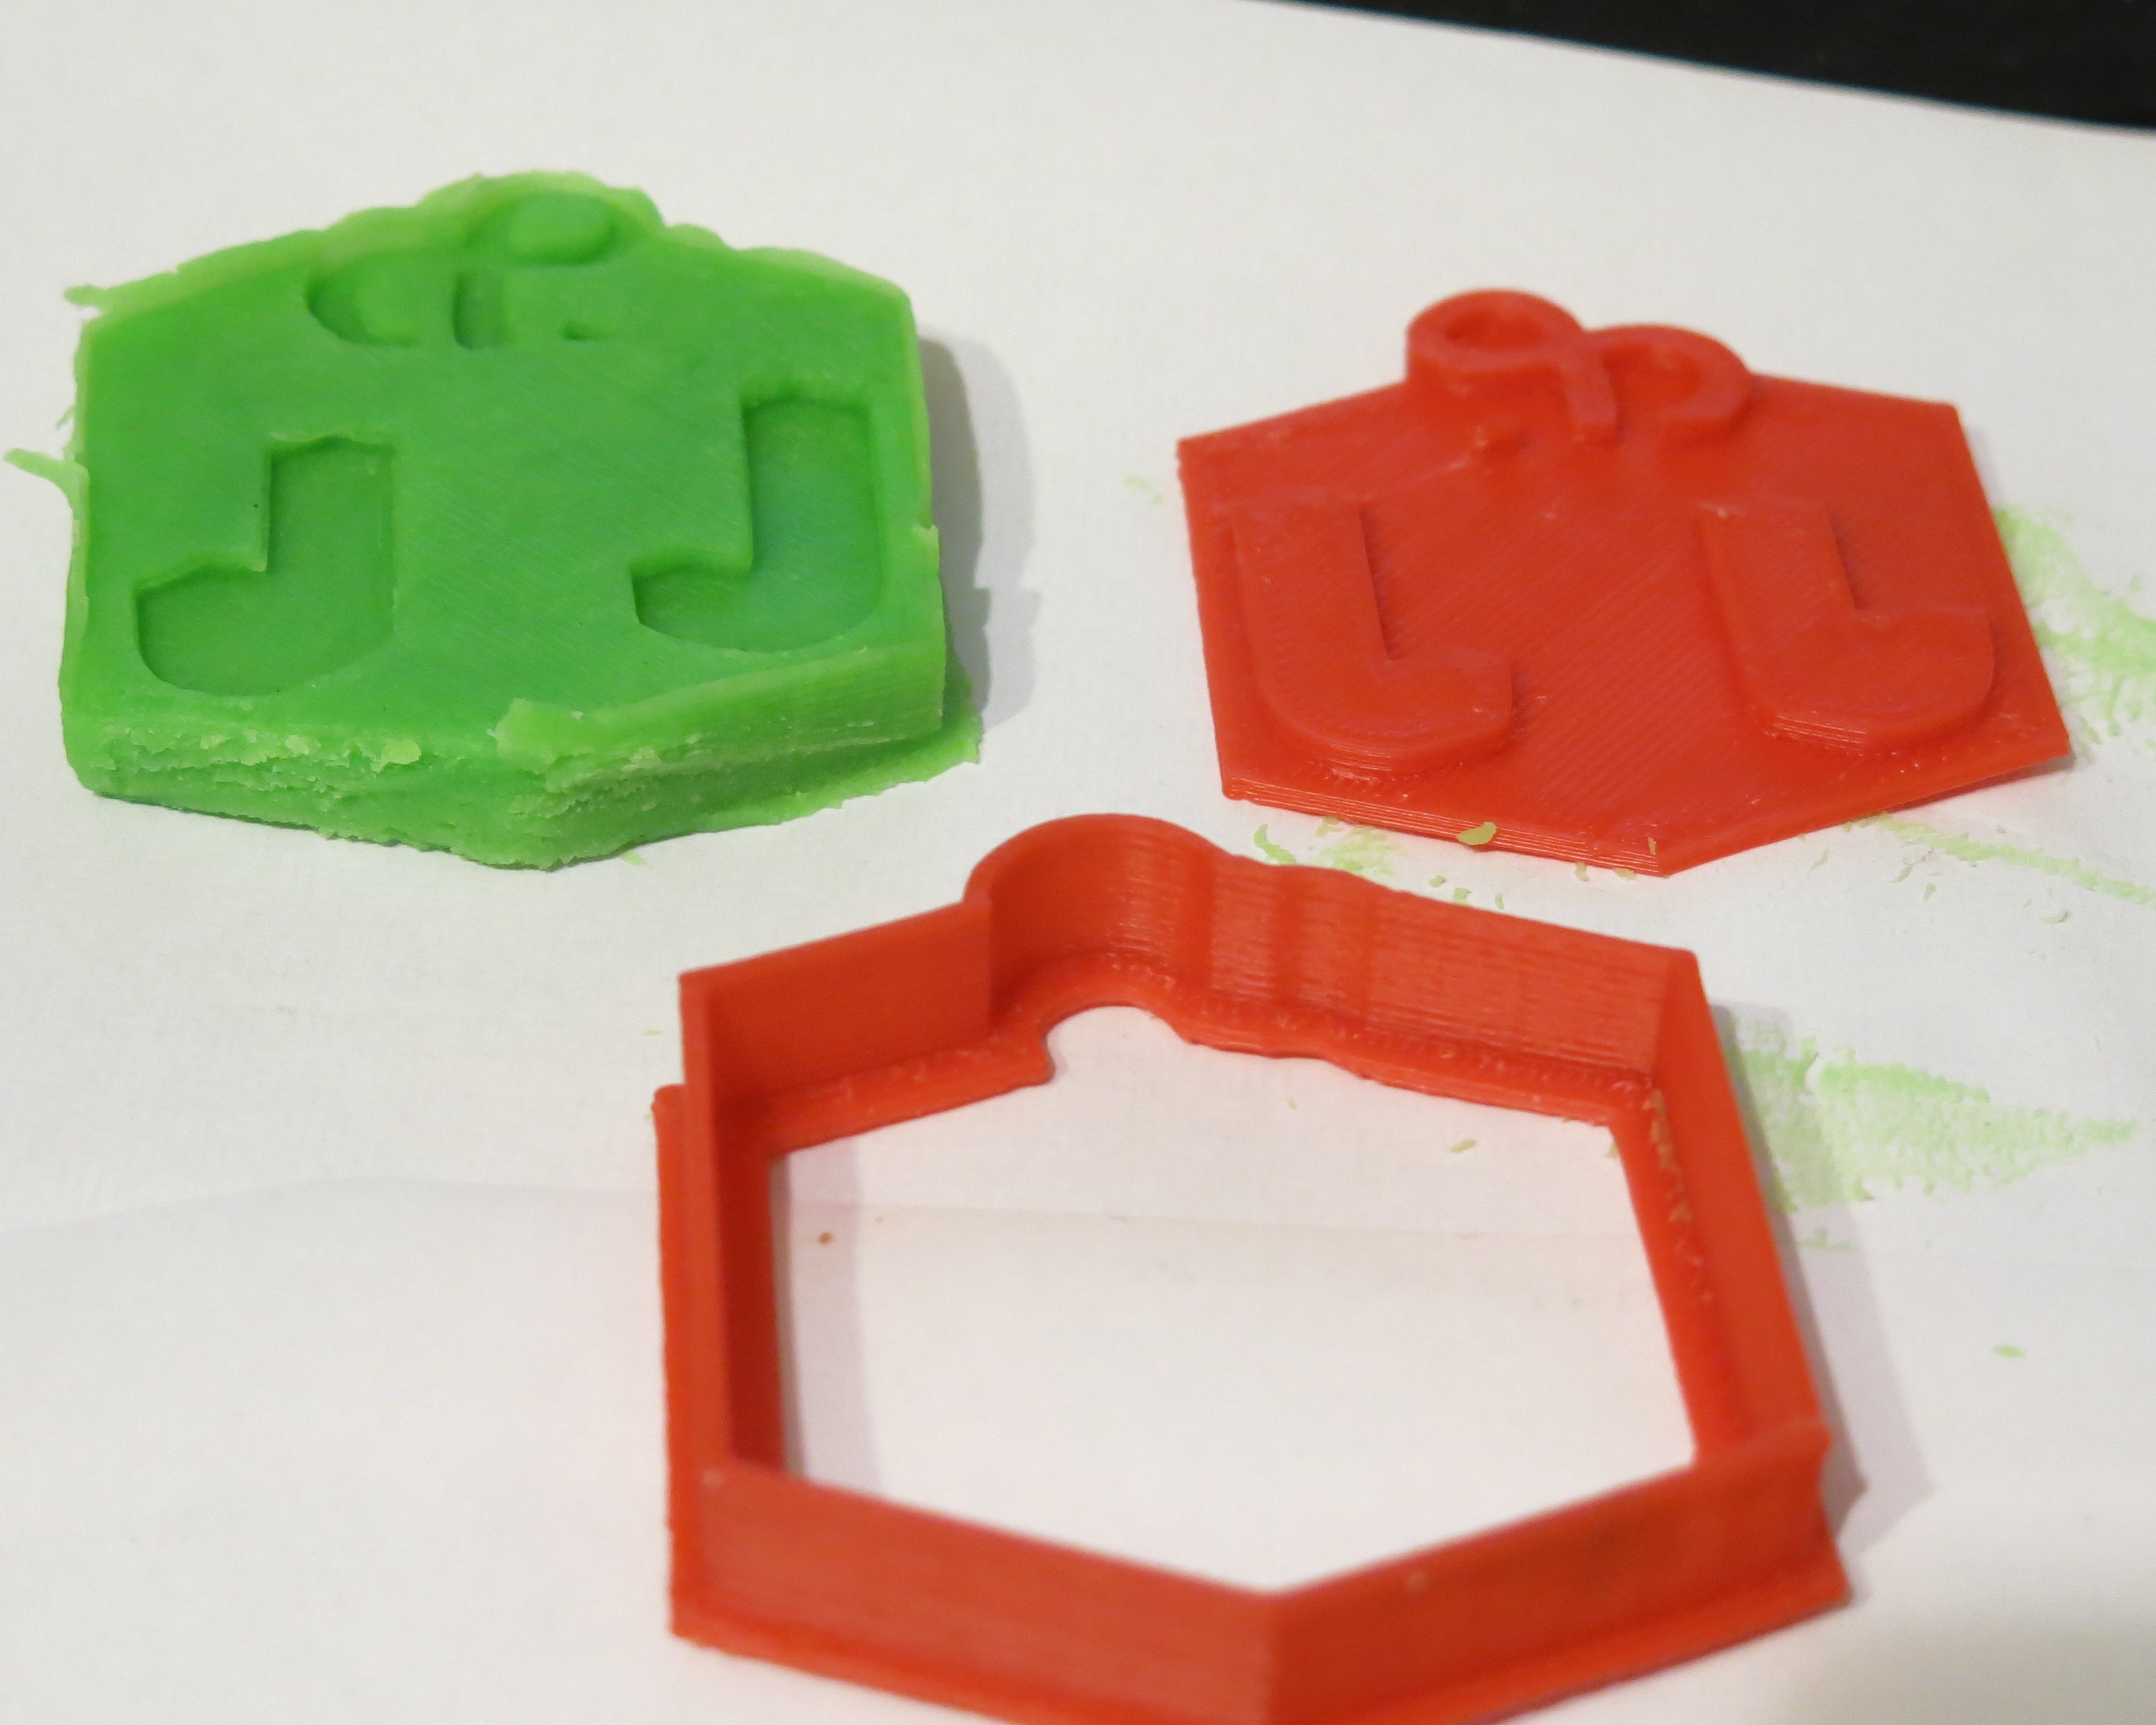 Cookie cutter and play dough test